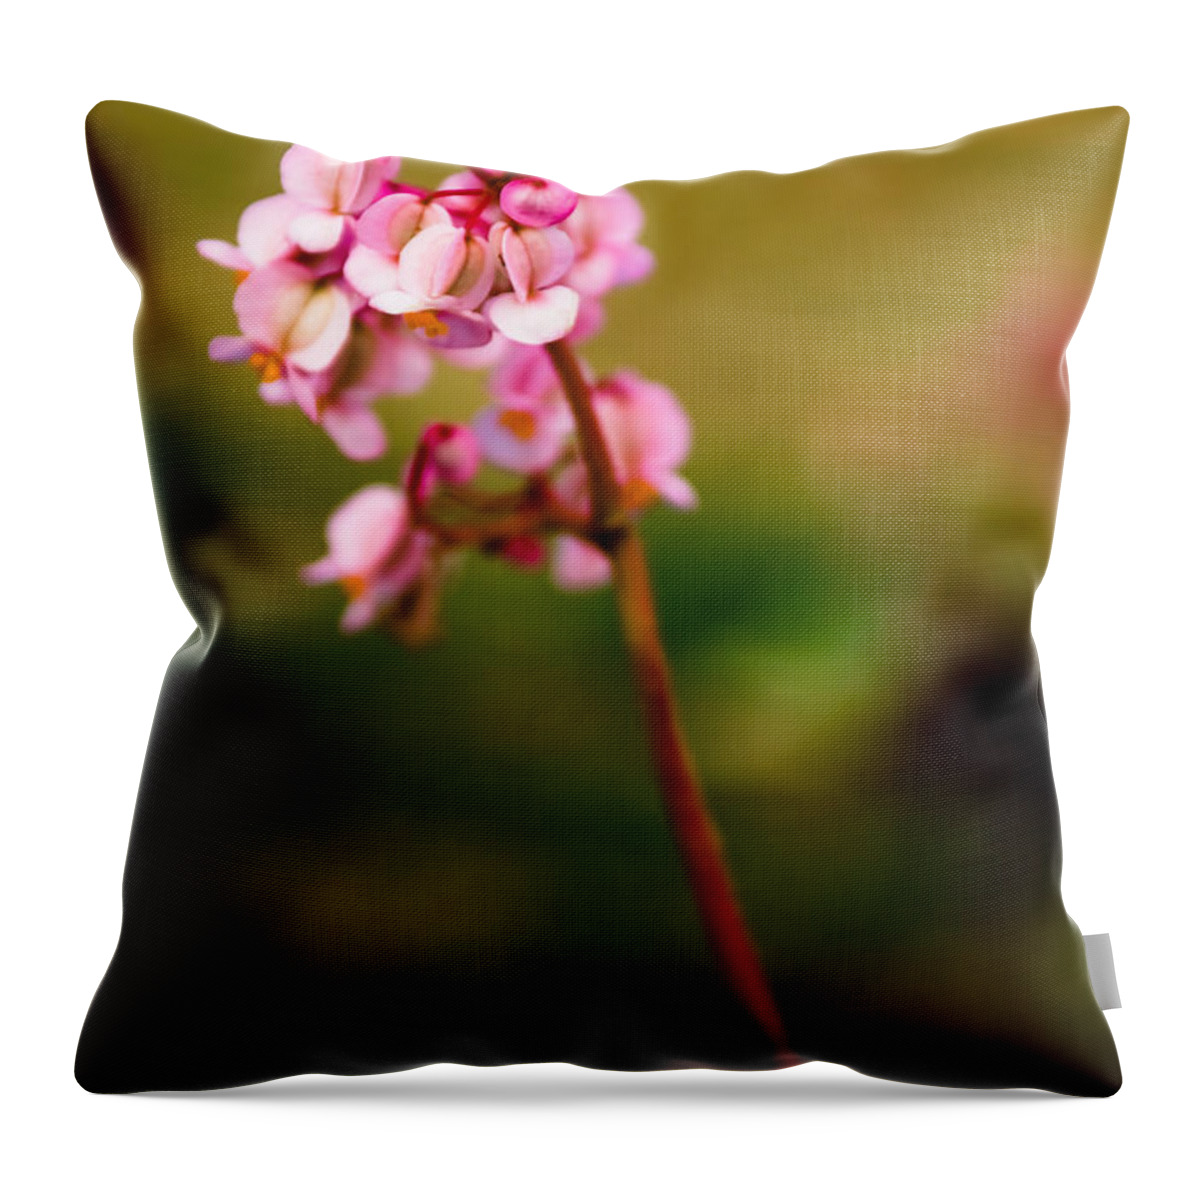 Flower Throw Pillow featuring the photograph Bug And Bud Love by Syed Aqueel